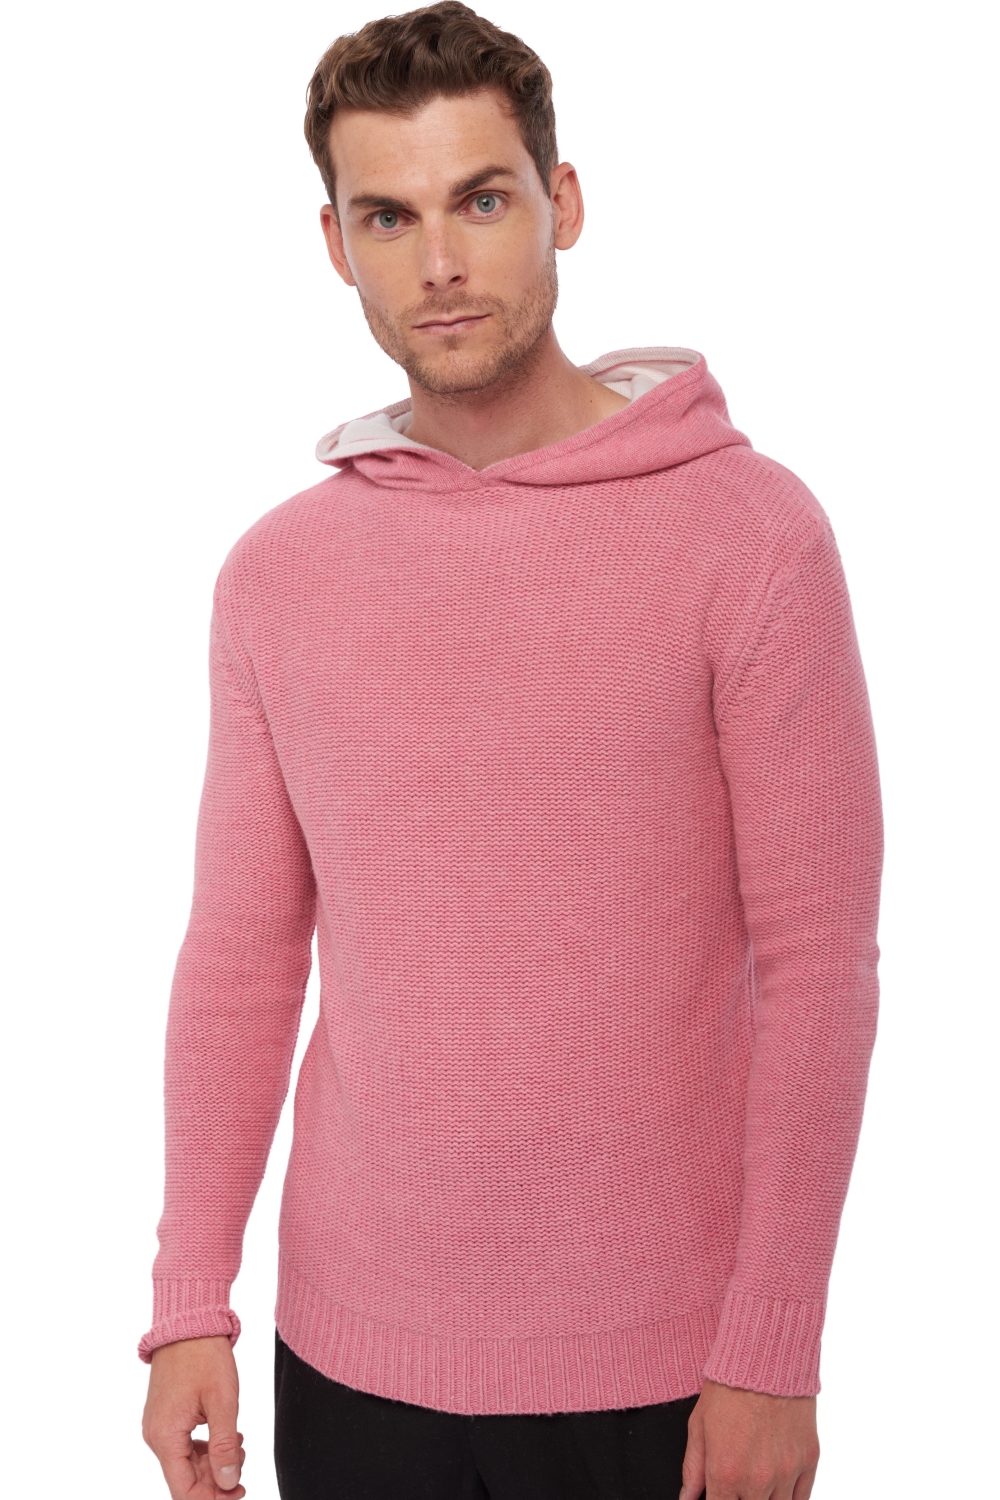 Yak pull homme zip capuche conor pink blanc casse m